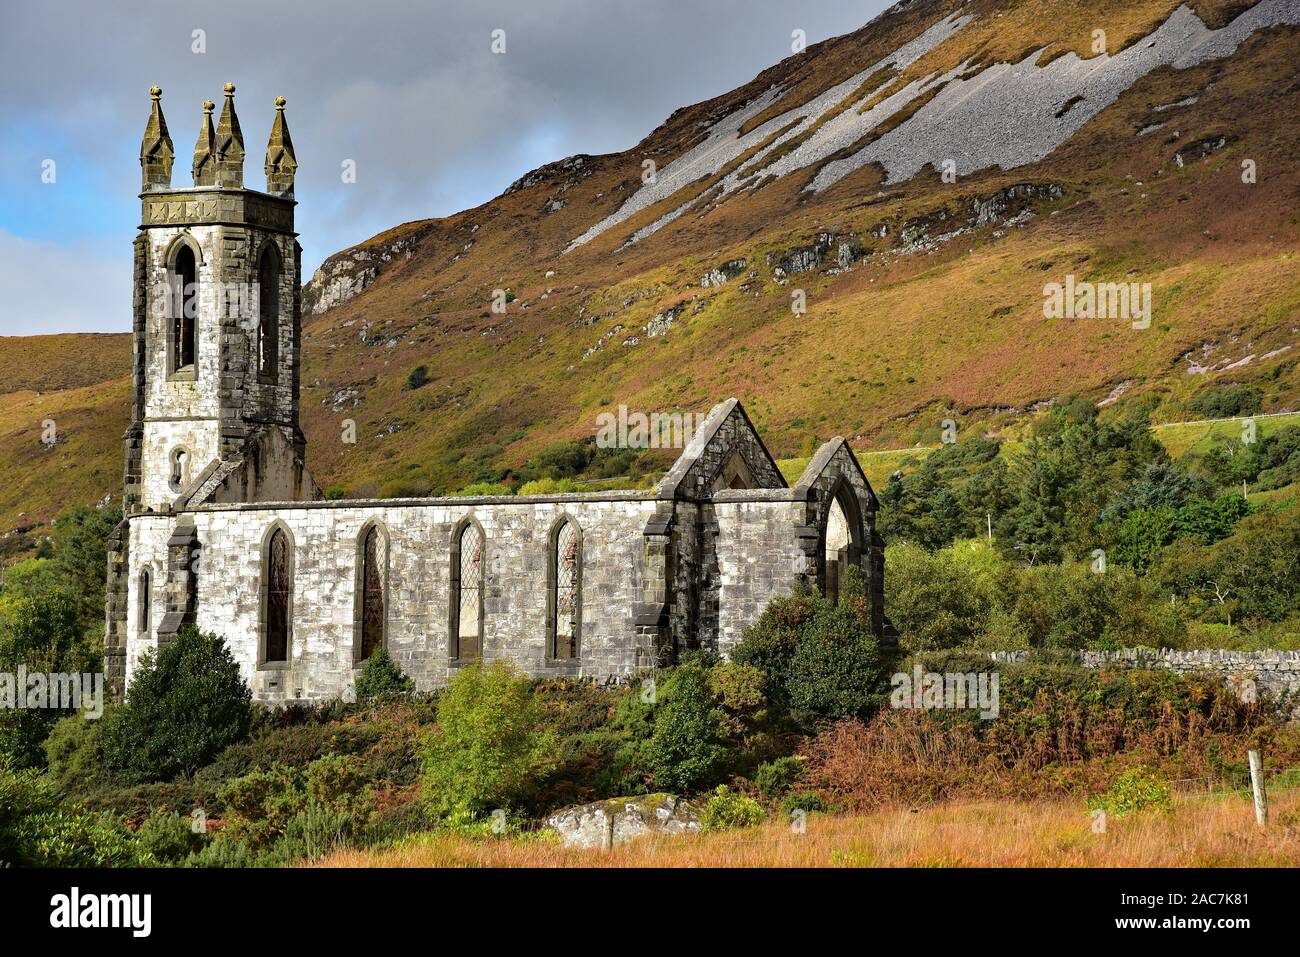 The abandoned Dunlewey Church at the foot of Mount Errigal, the tallest peak of the Derryveagh Gaeltacht, Poisoned Glen, Ireland, Europe. Stock Photo